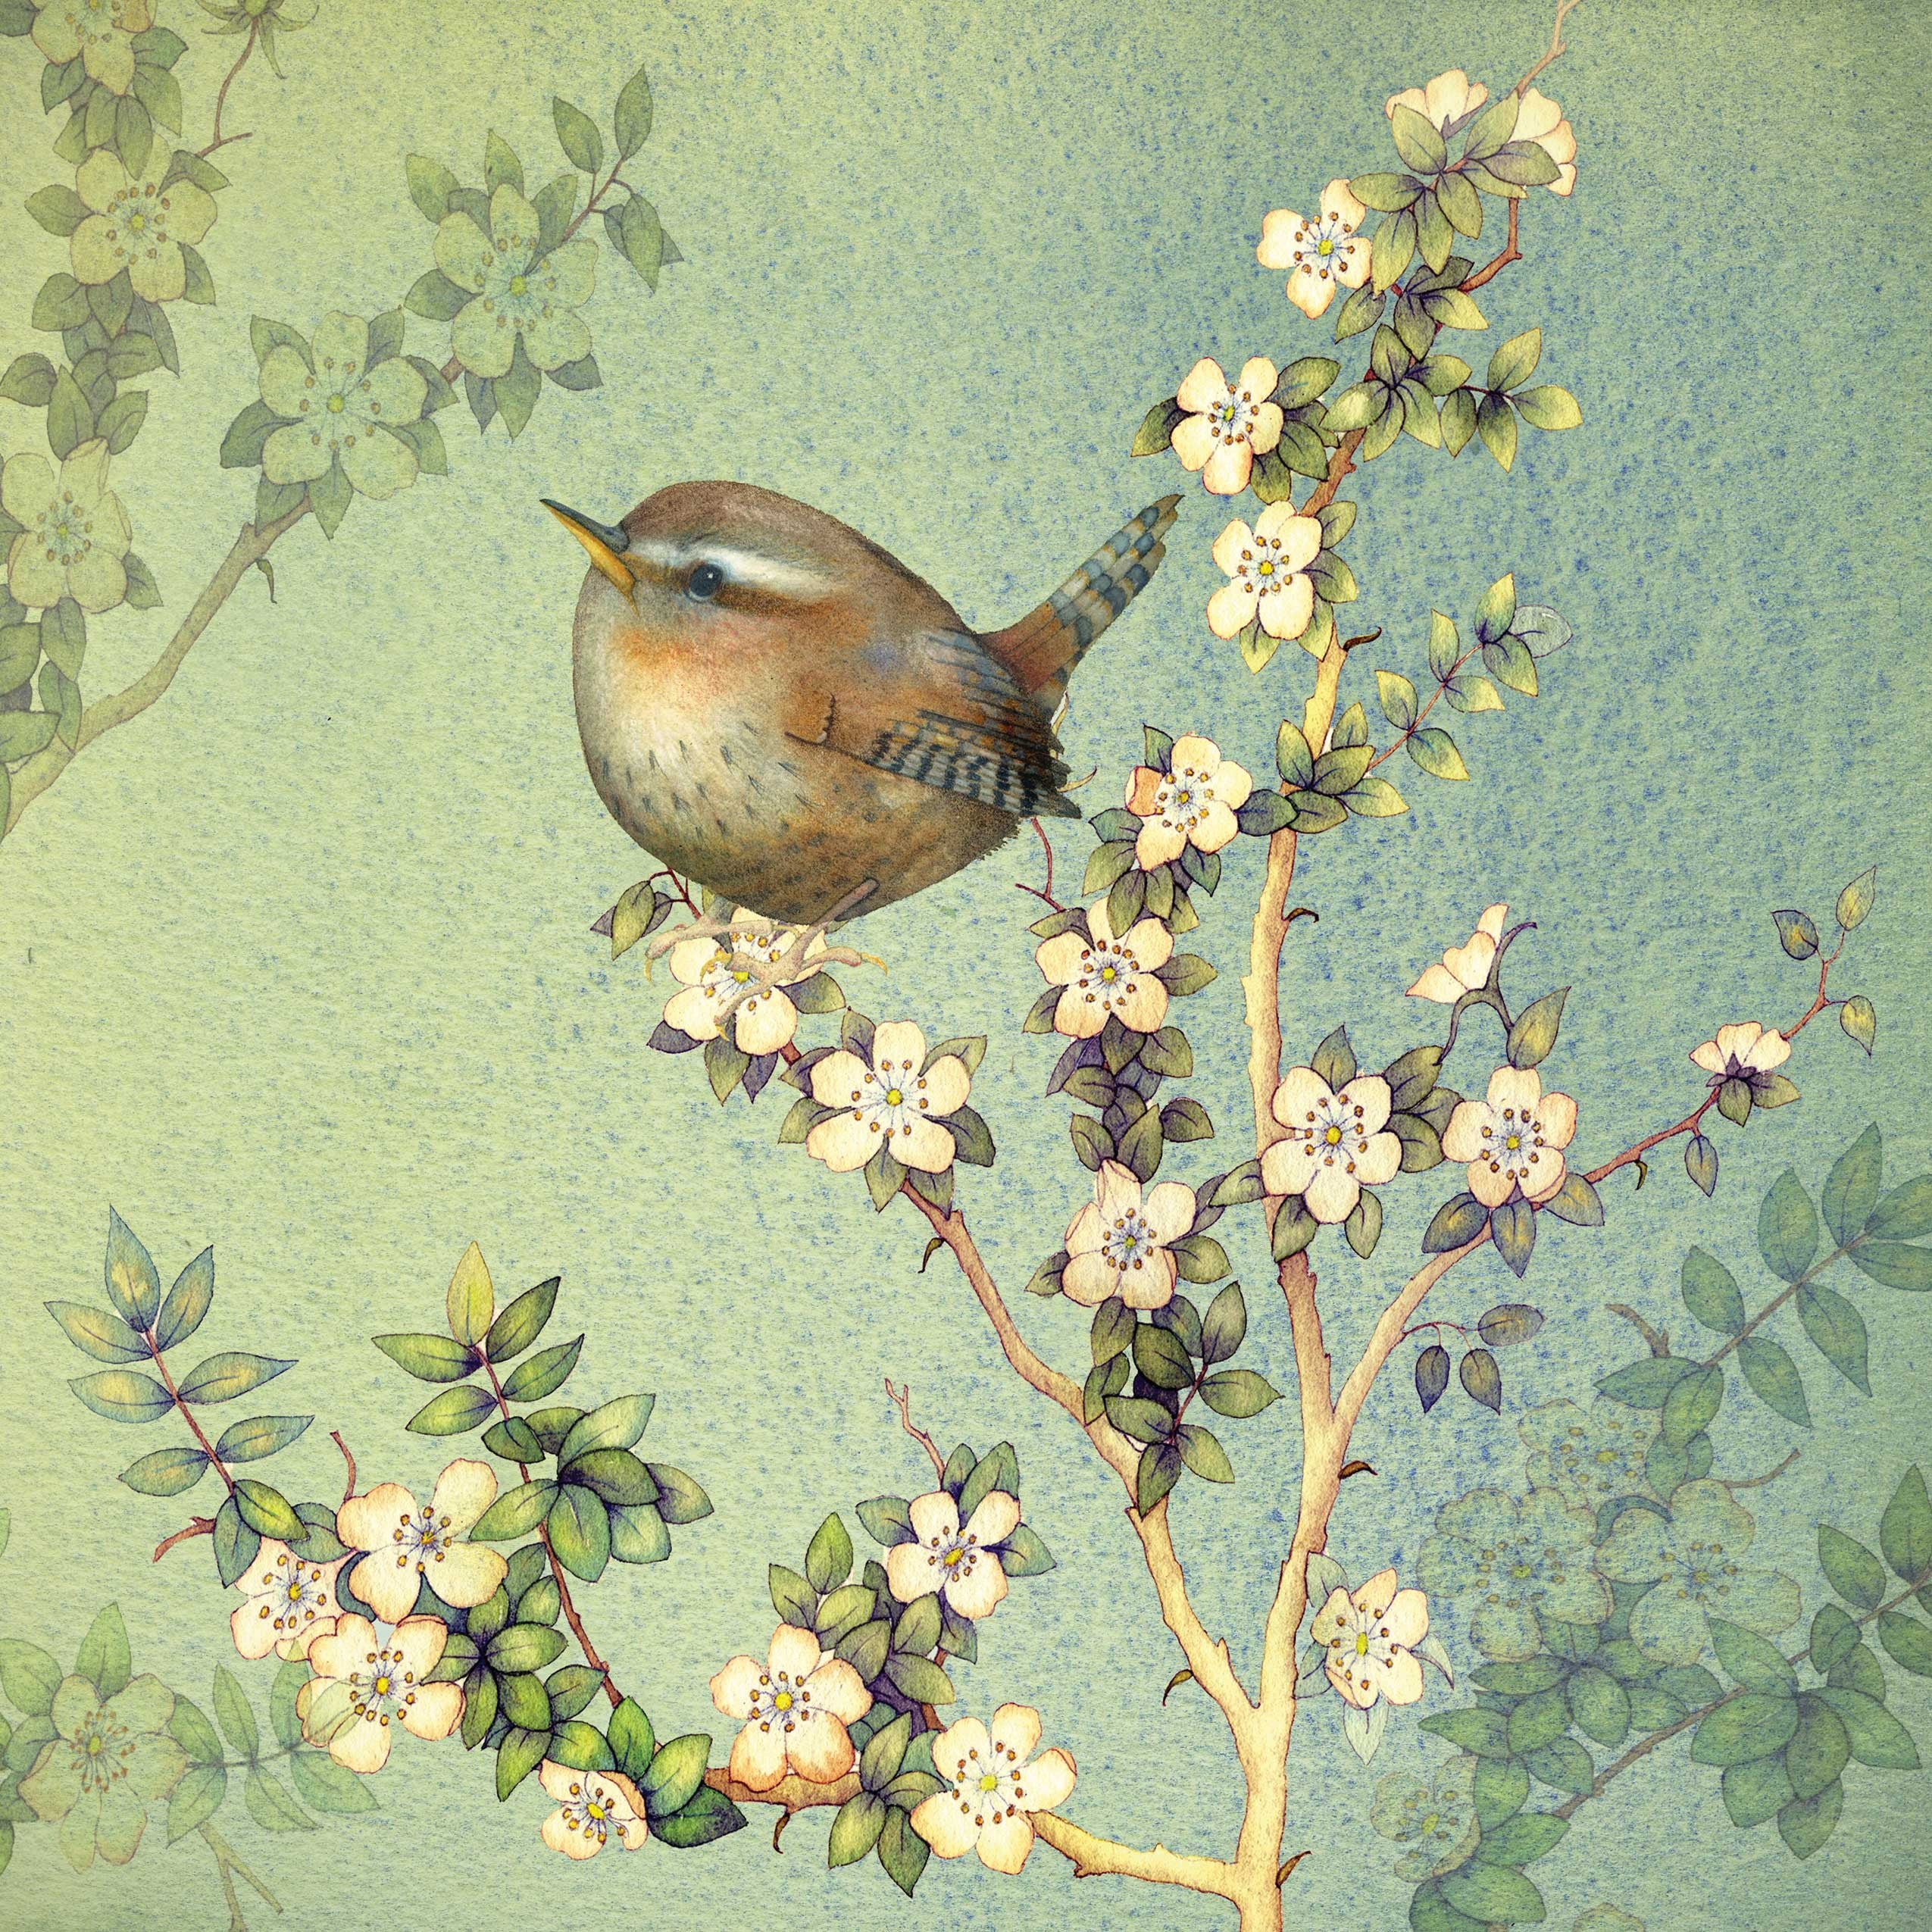 Tiny Wren by Kate Green, Art Greeting Card, Mixed Media, A tiny wren on blossom branch